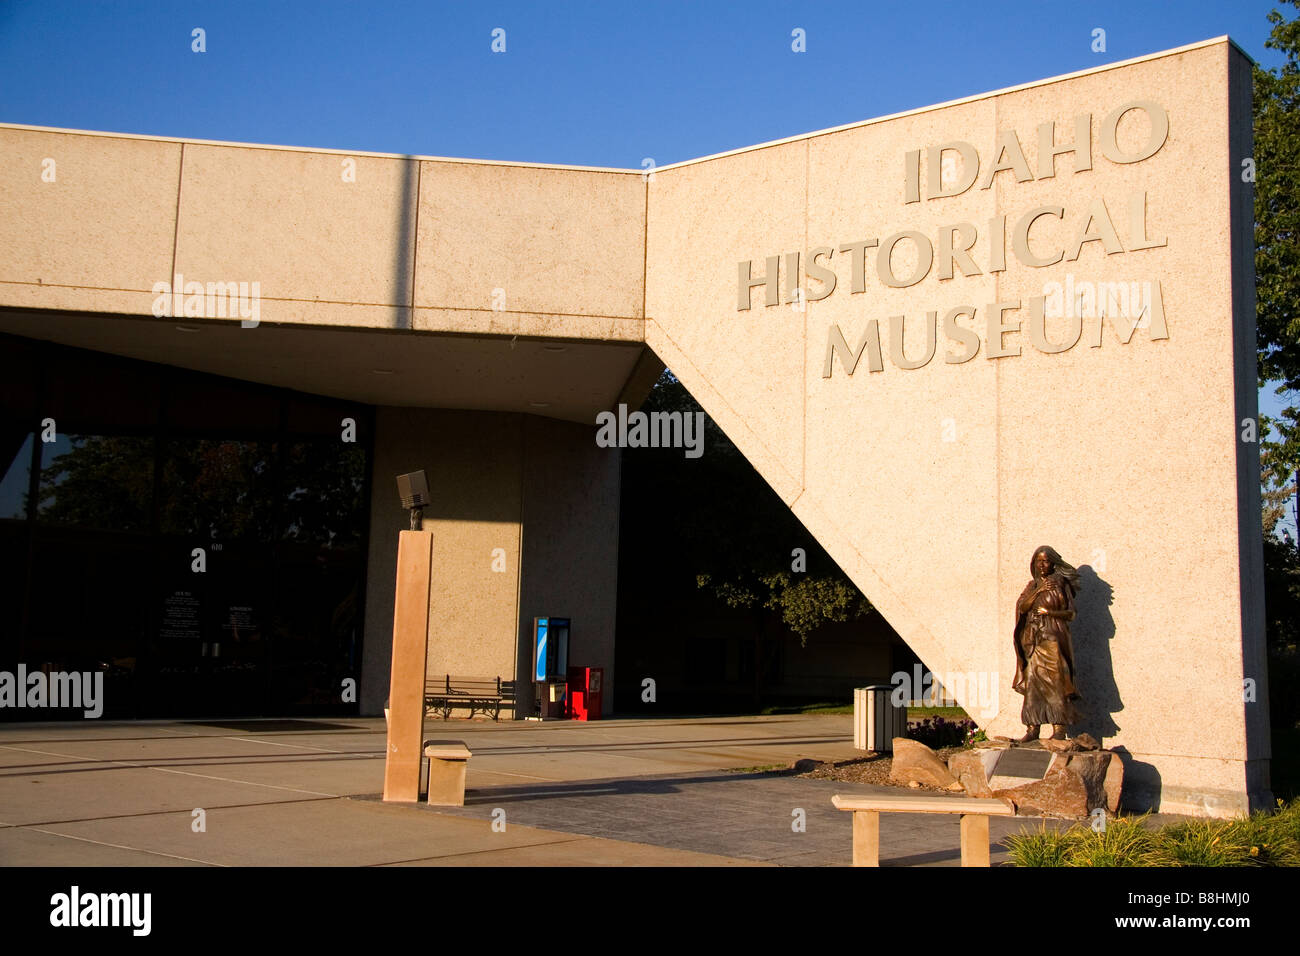 Bronze sculpture of Shoshone woman Sacagawea in front of the Idaho Historical Museum in Boise Idaho Stock Photo